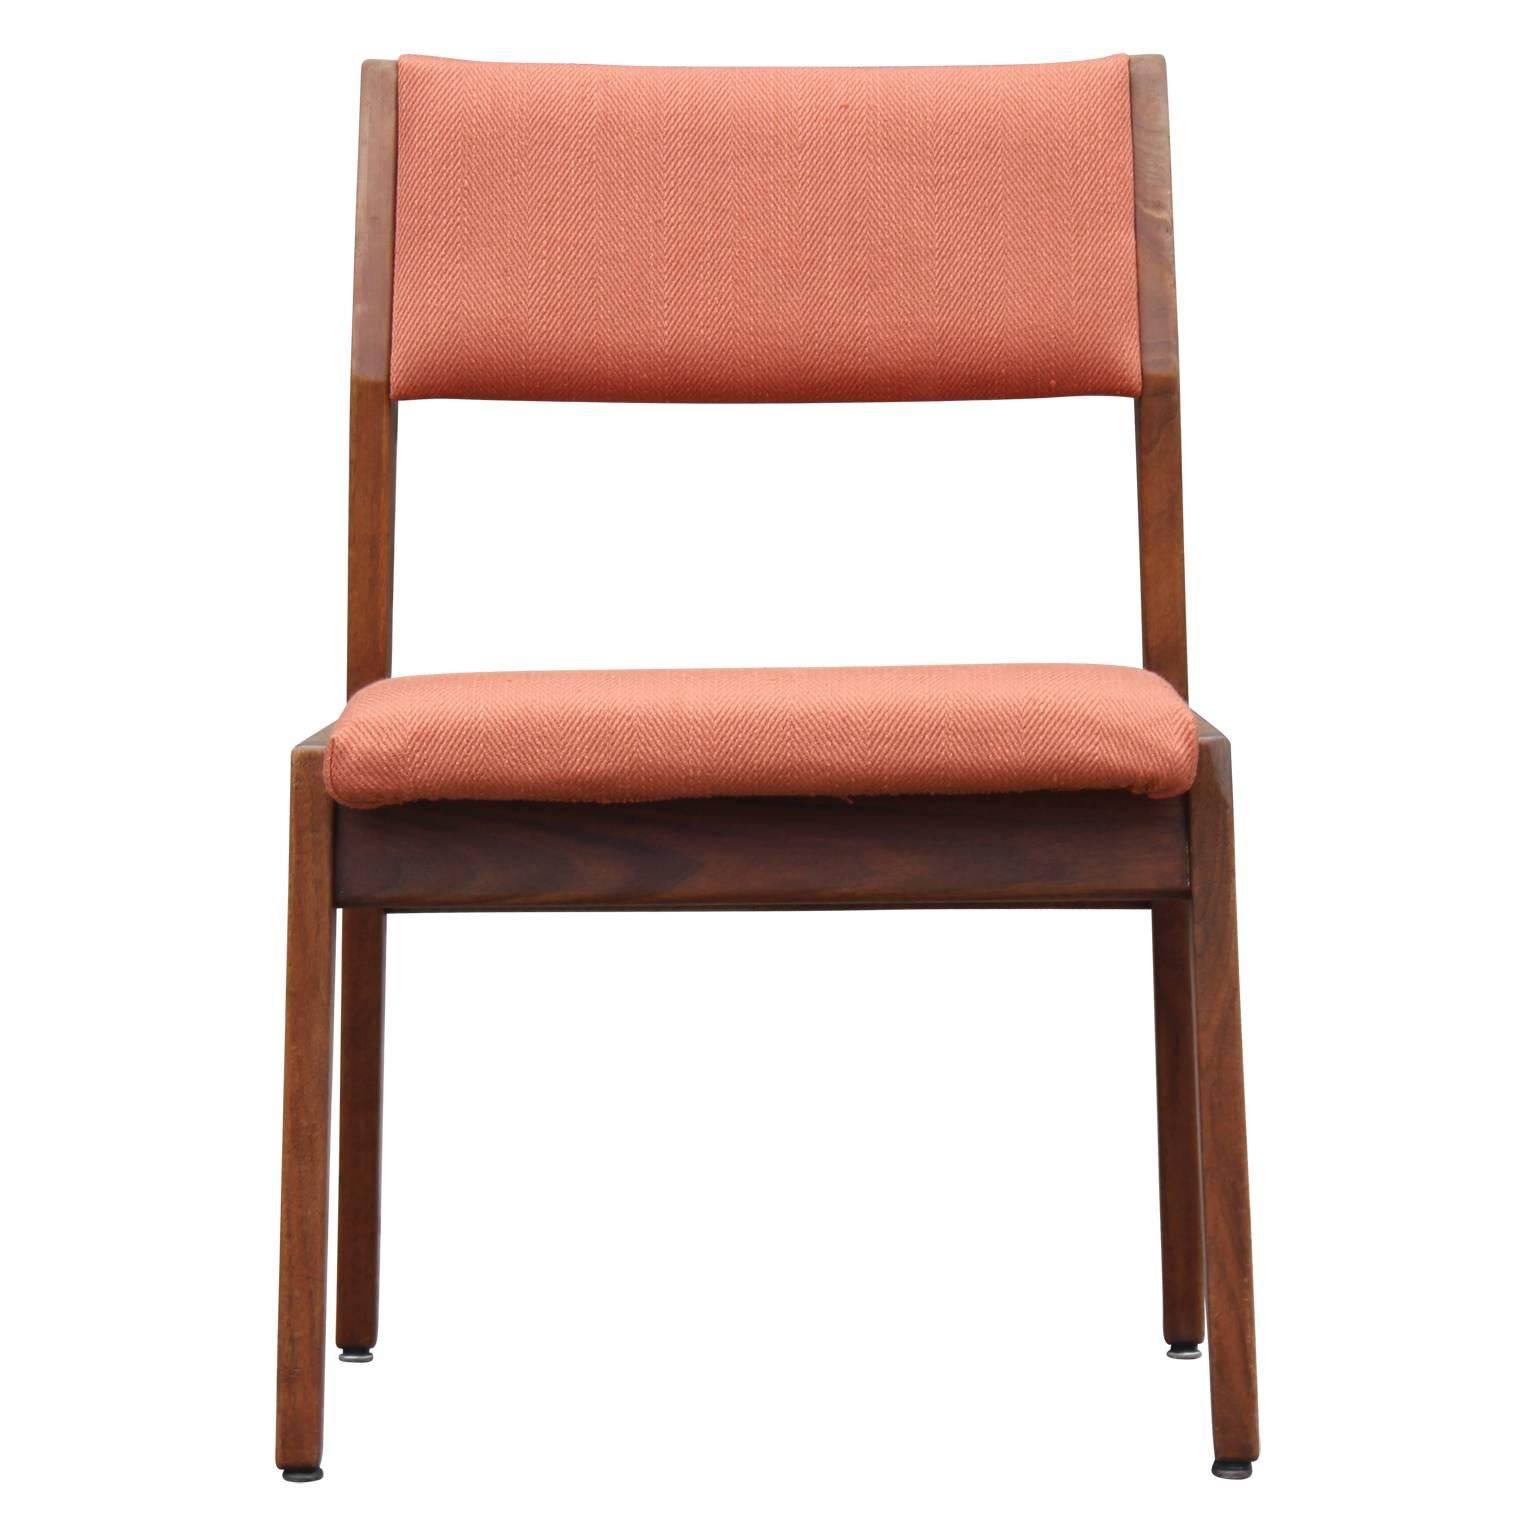 Set of four modern dining chairs by Jens Risom in the original peach / orange fabric. The sculptural design provides a nice modern and sleek look.